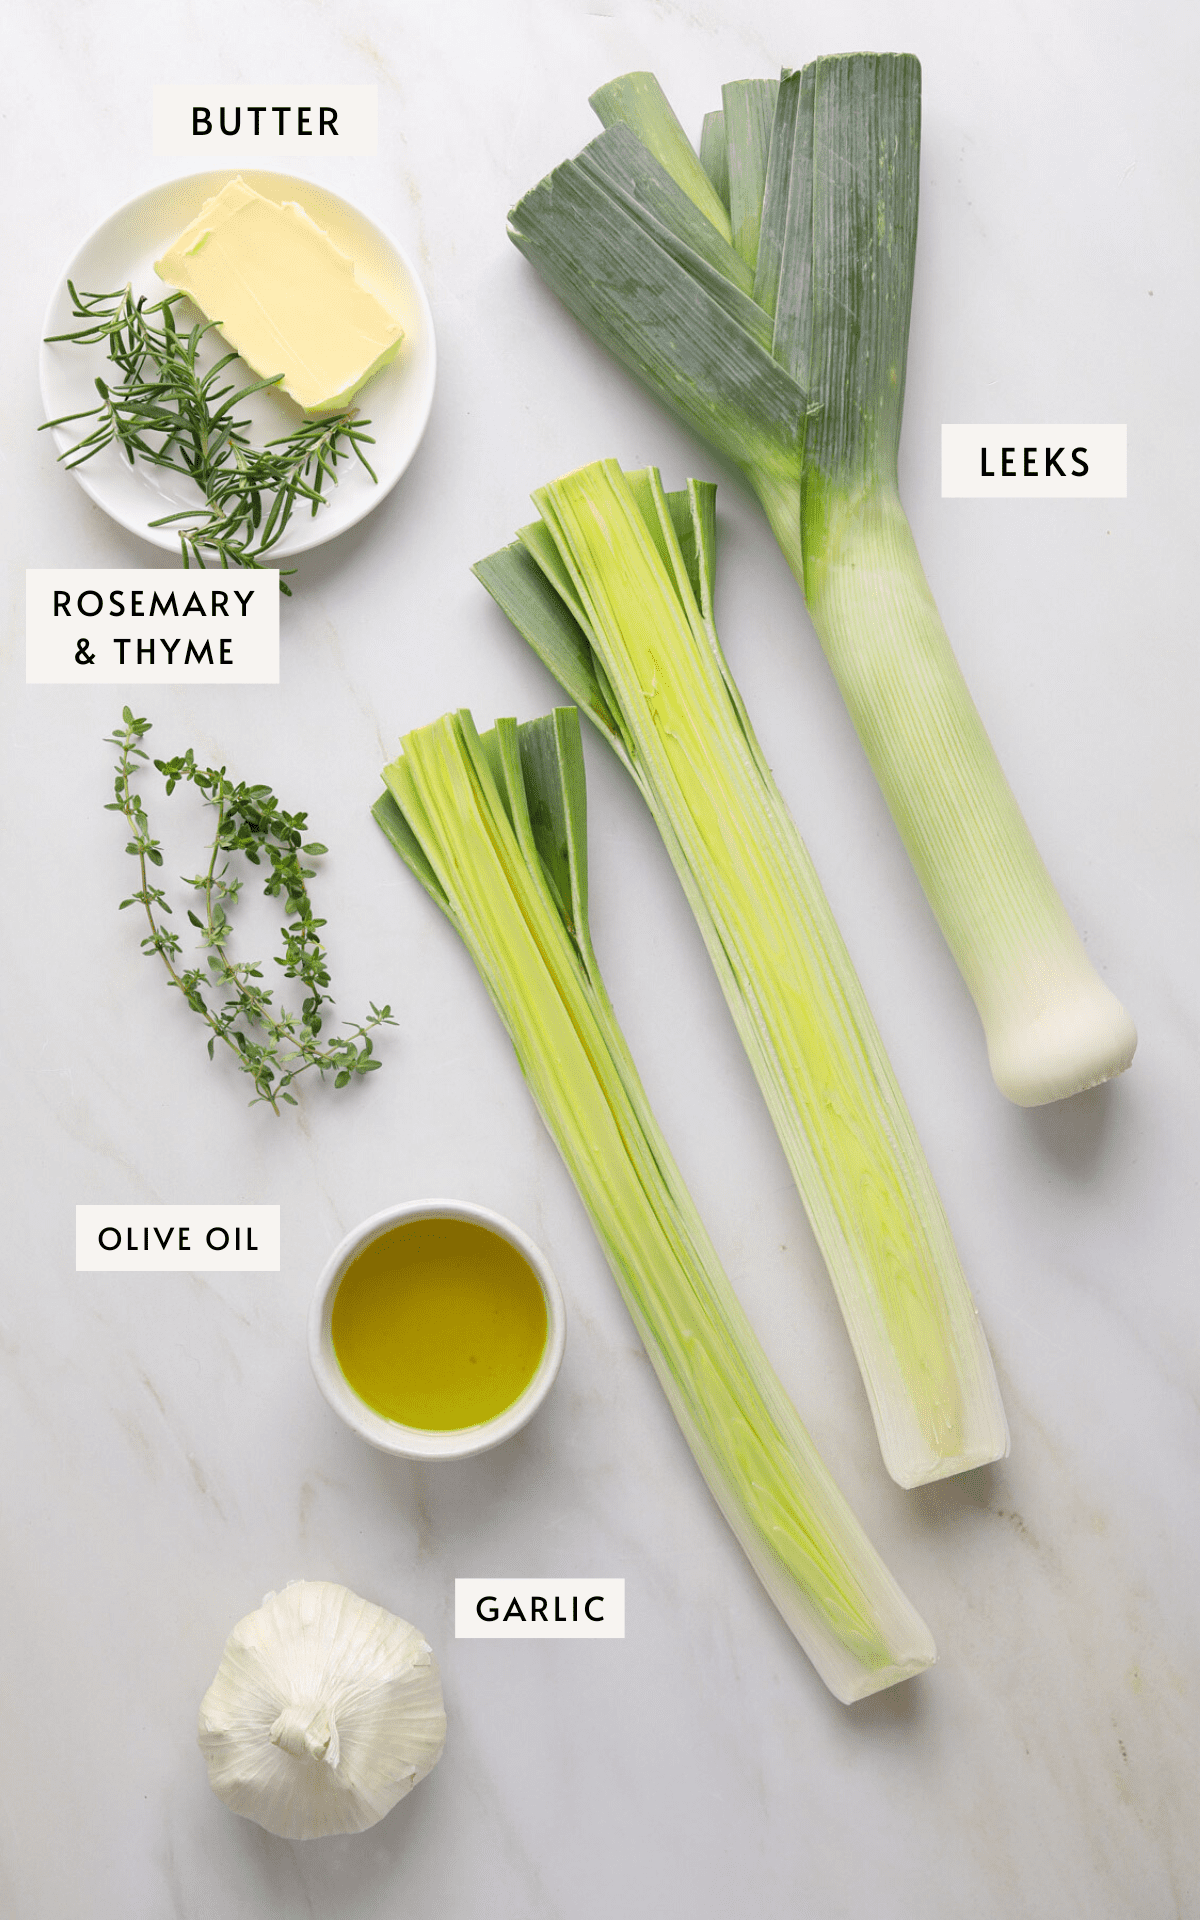 Two leeks (one whole, one cut in halt lengthwise), a small bowl of olive oil, a knob of butter, a head of garlic and sprigs of rosemary and thyme on a white marble background.